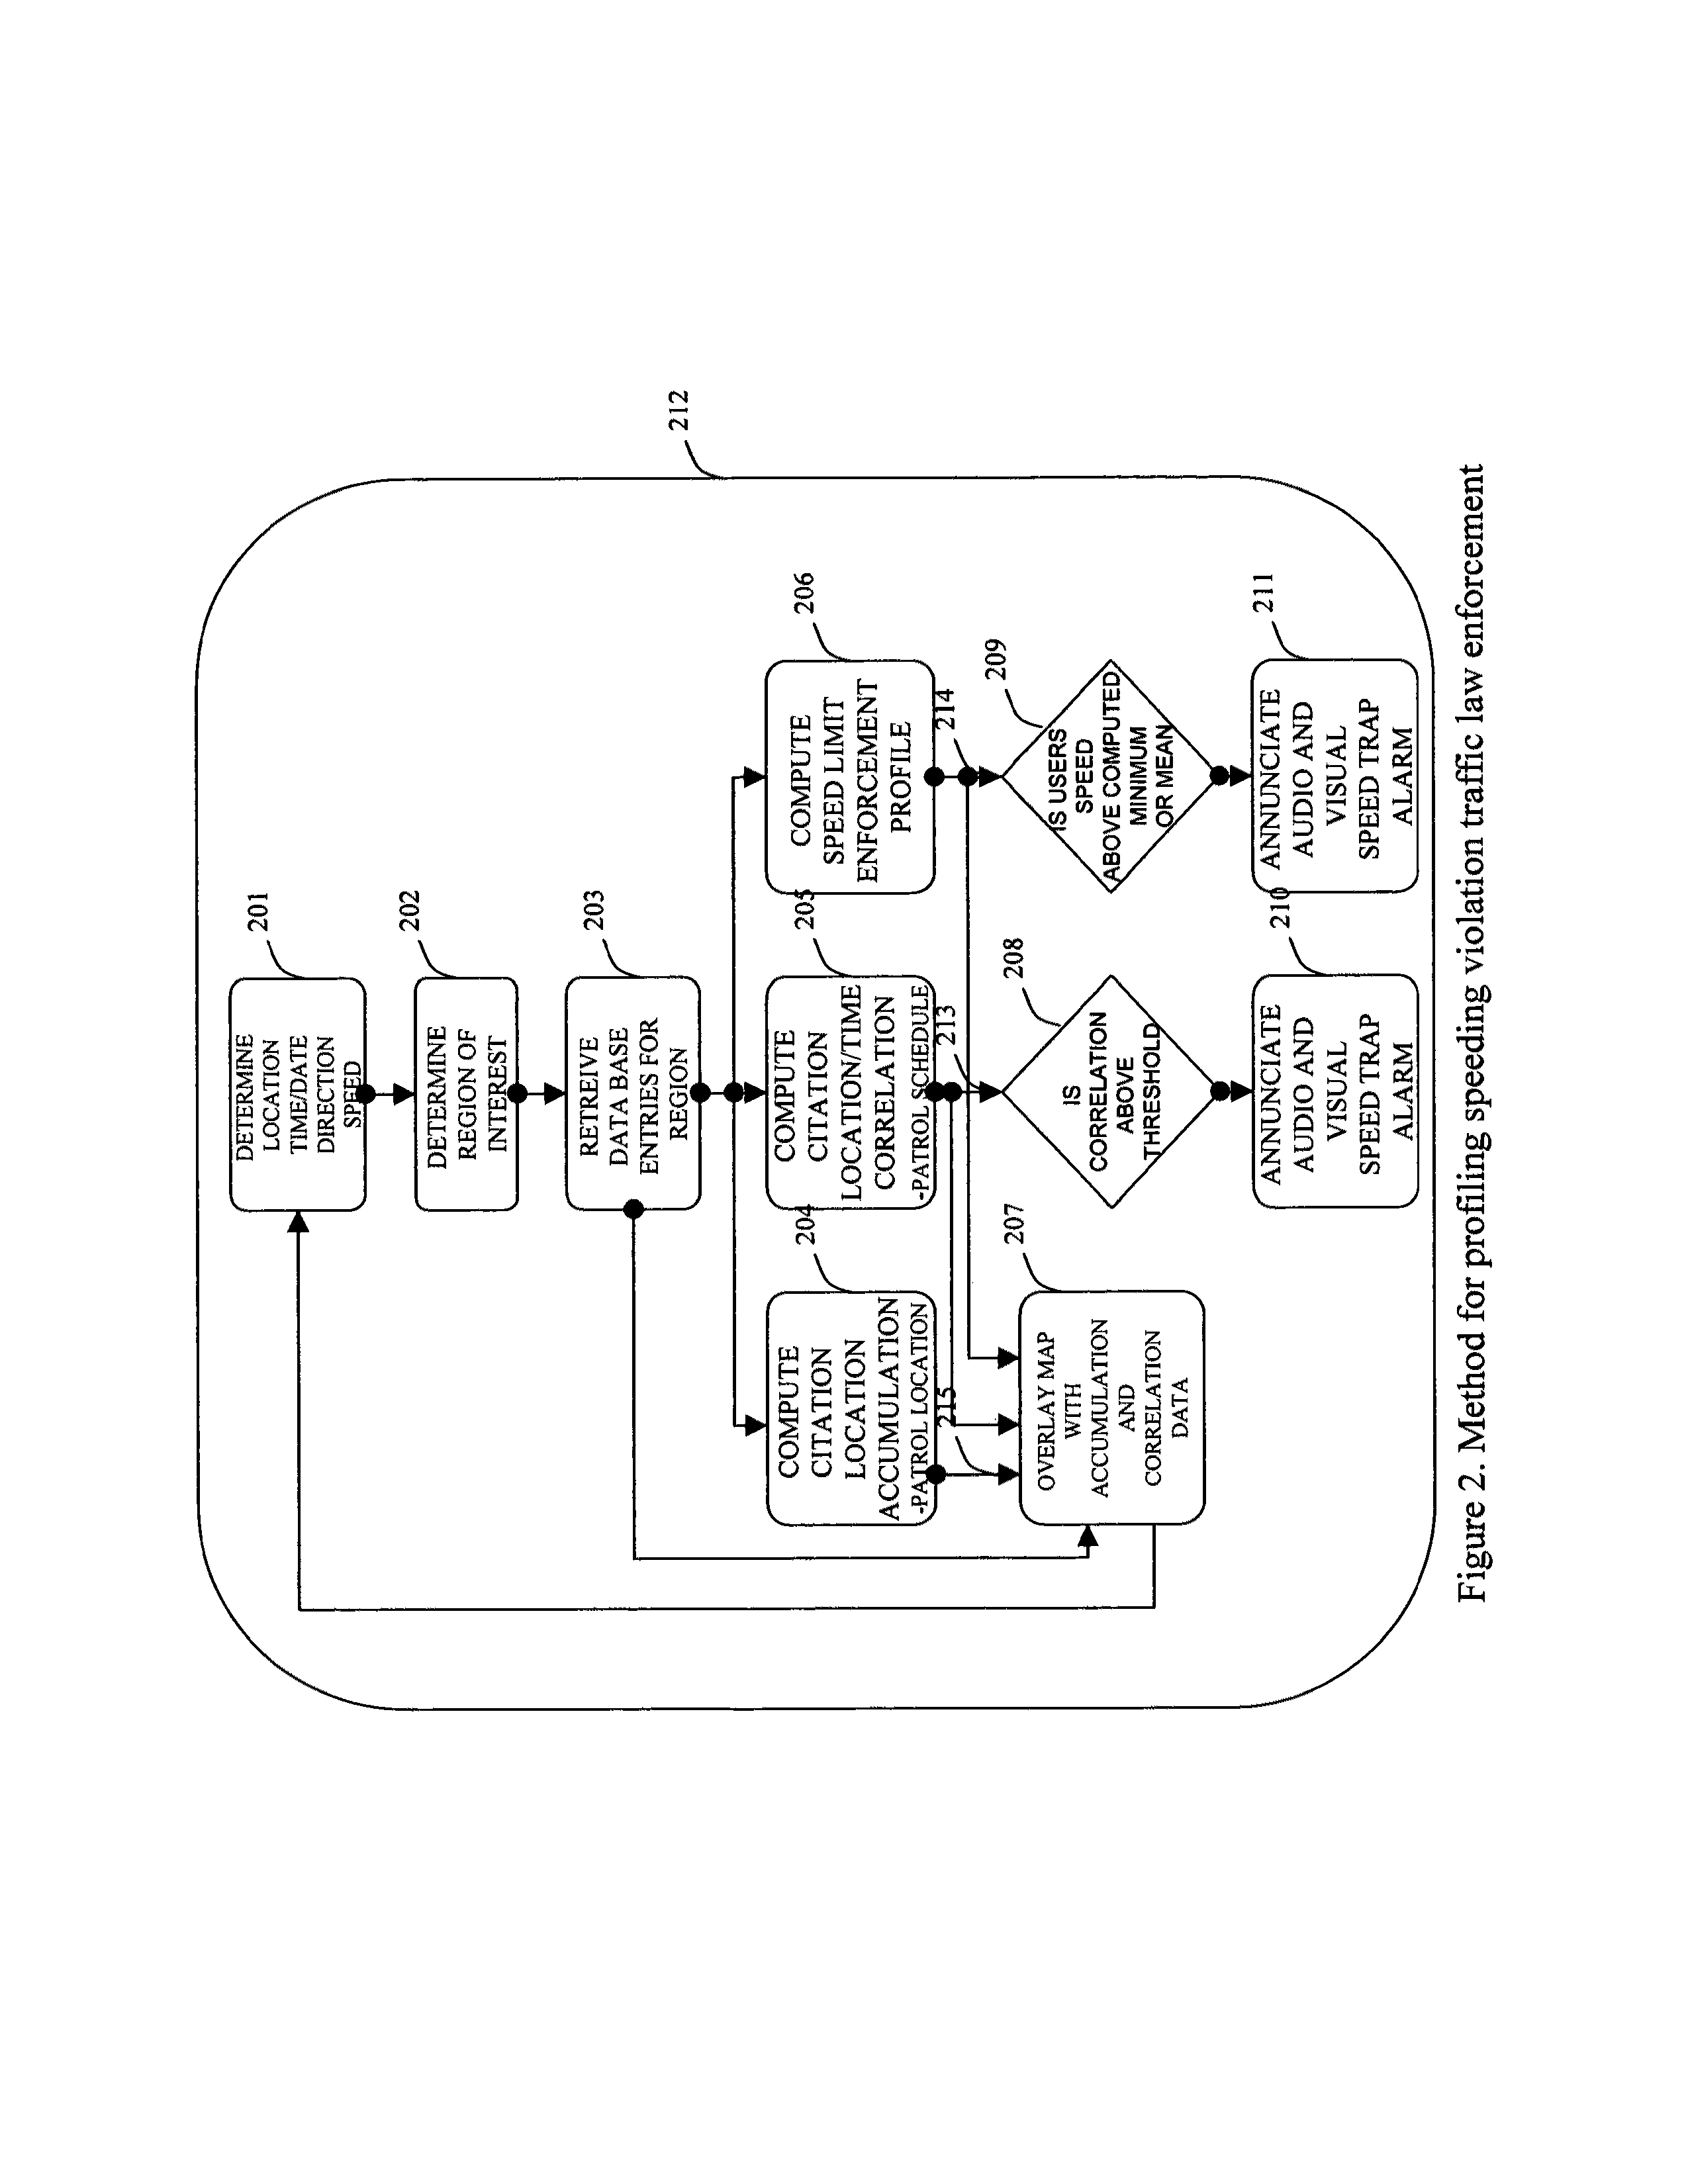 Method and apparatus for predicting locations and schedules of law enforcement traffic patrols